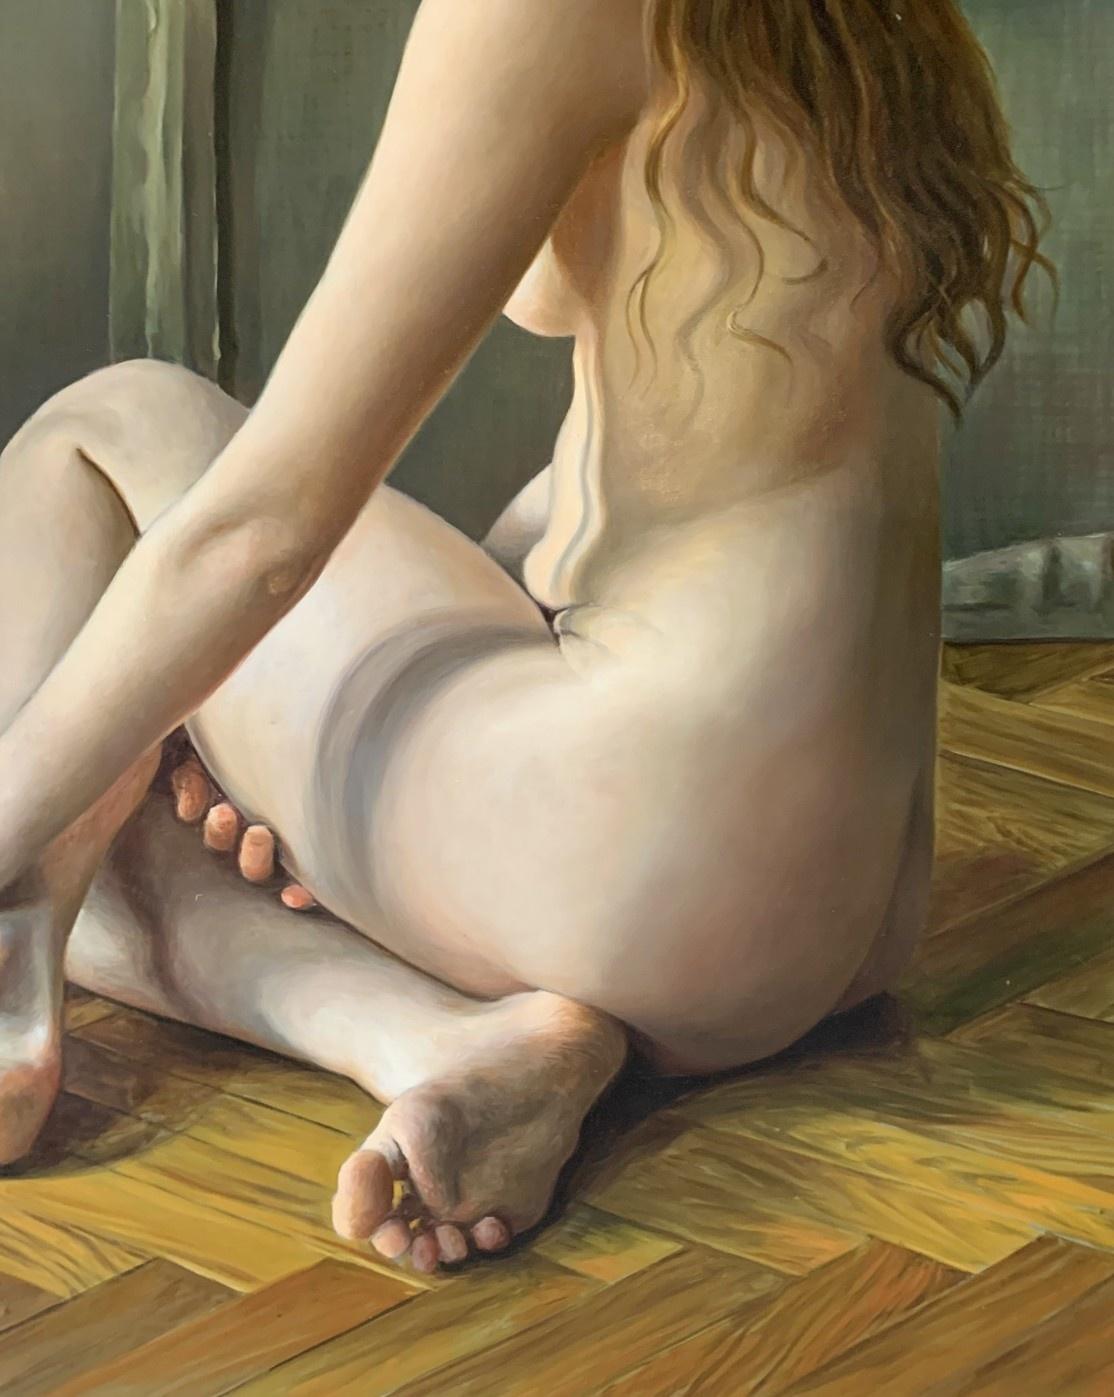 Time - Realistic oil painting, Nude, Young Polish artist - Naturalistic Painting by Agnieszka Staak-Janczarska